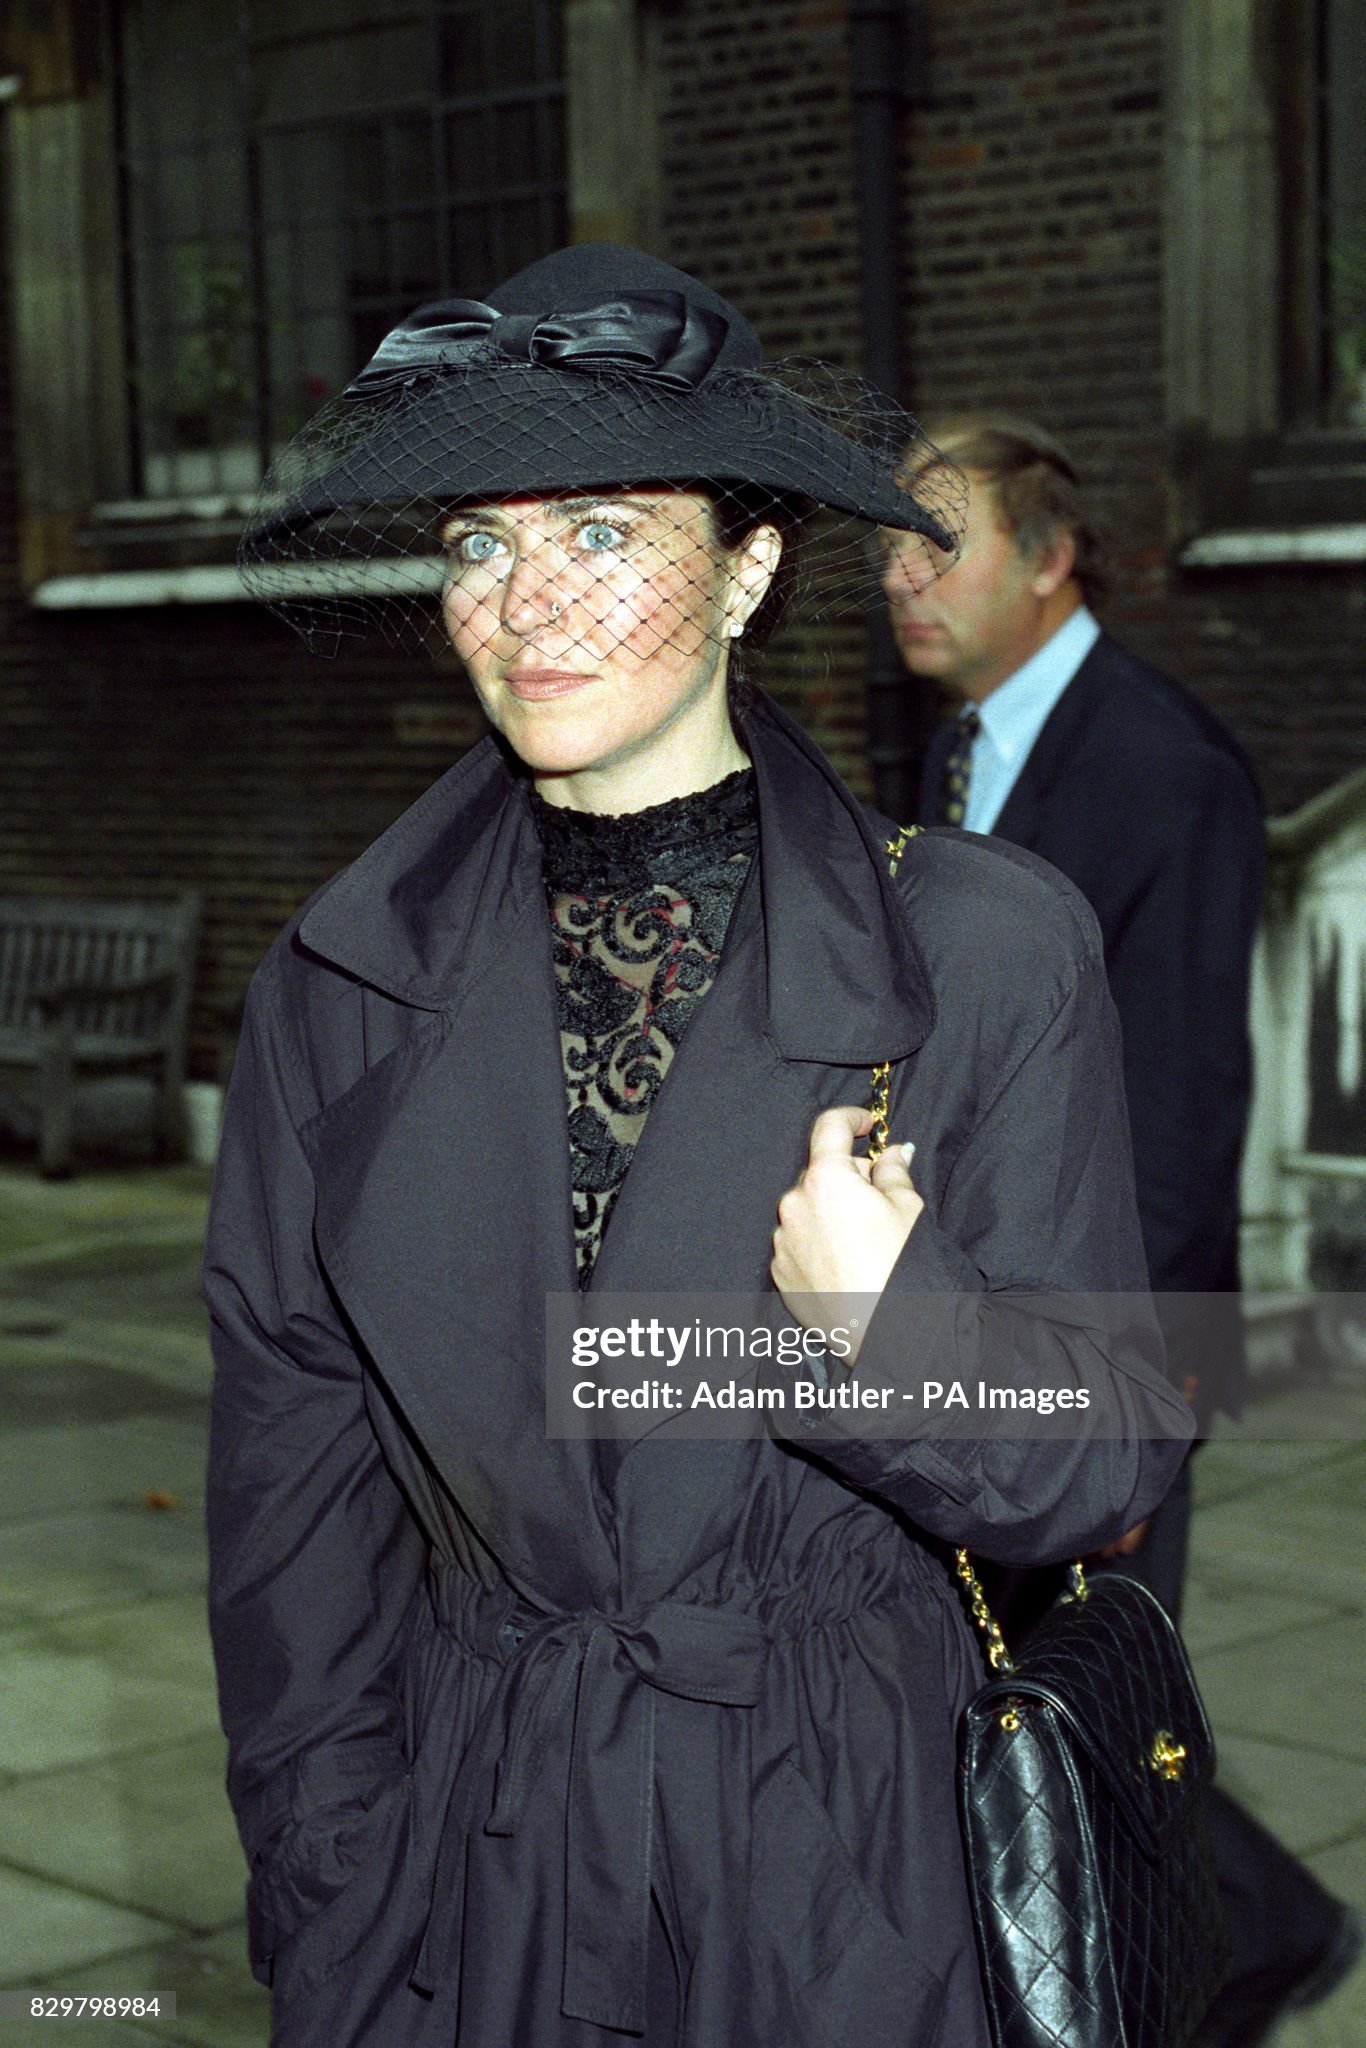 Actress photographer Koo Stark leaving St James’ Church, Piccadilly, following a memorial service for former Formula 1 World Champion James Hunt on 29 September 1993. 